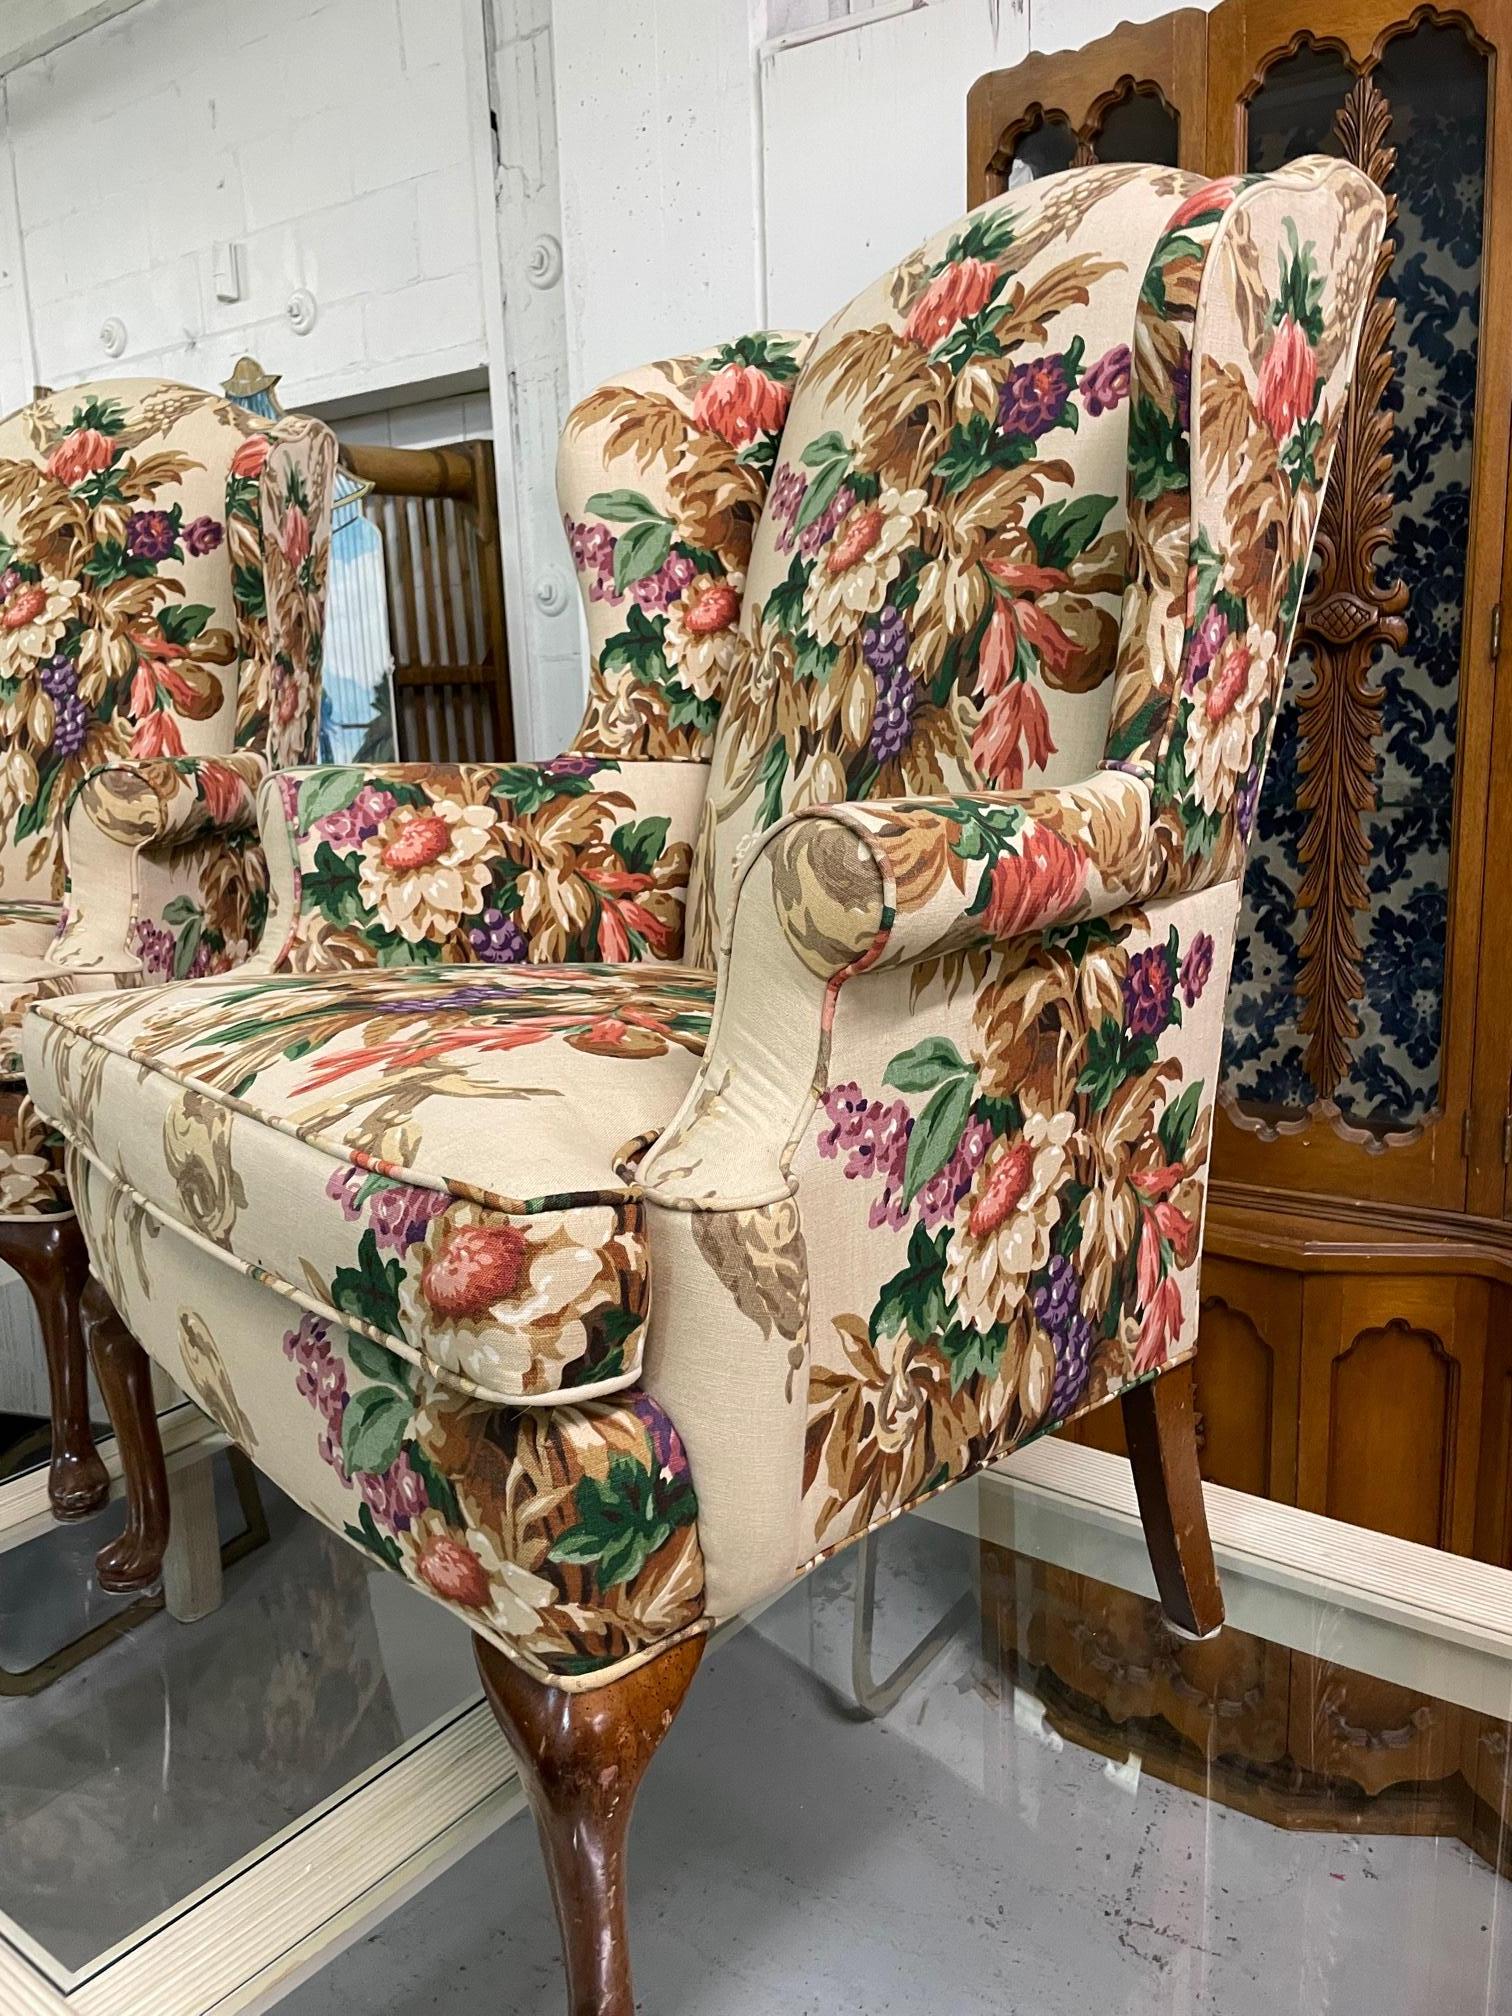 Pair of vintage wingback chairs upholstered in a colorful floral upholstery. Solid construction and only very minor imperfections consistent with age. No odors, stains or holes in fabric.